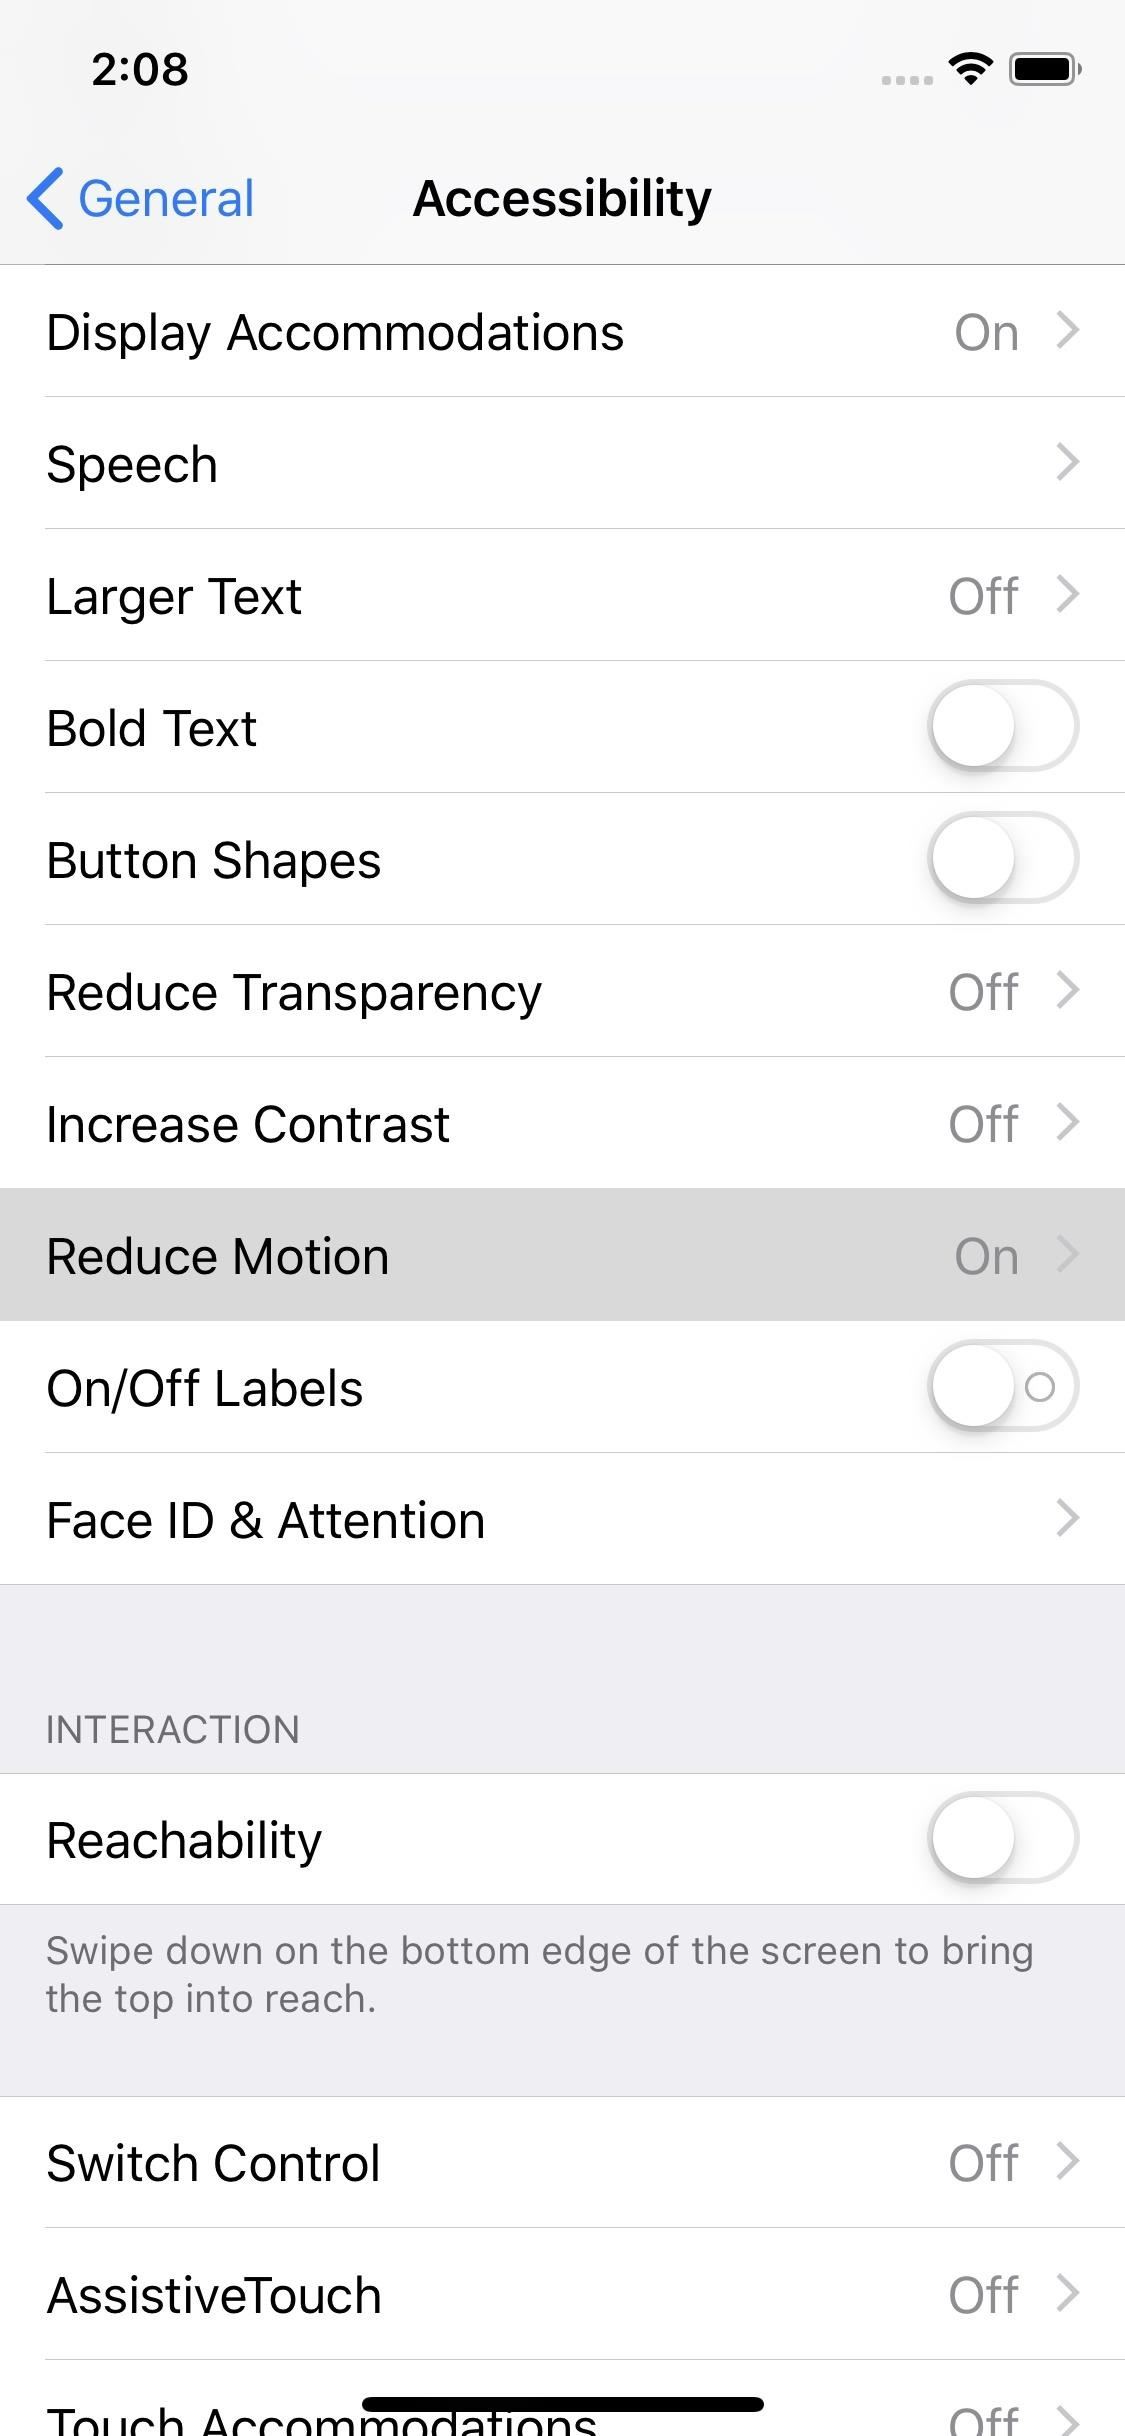 How to Disable the Parallax Effect in iOS to Reduce Motion on Your iPhone